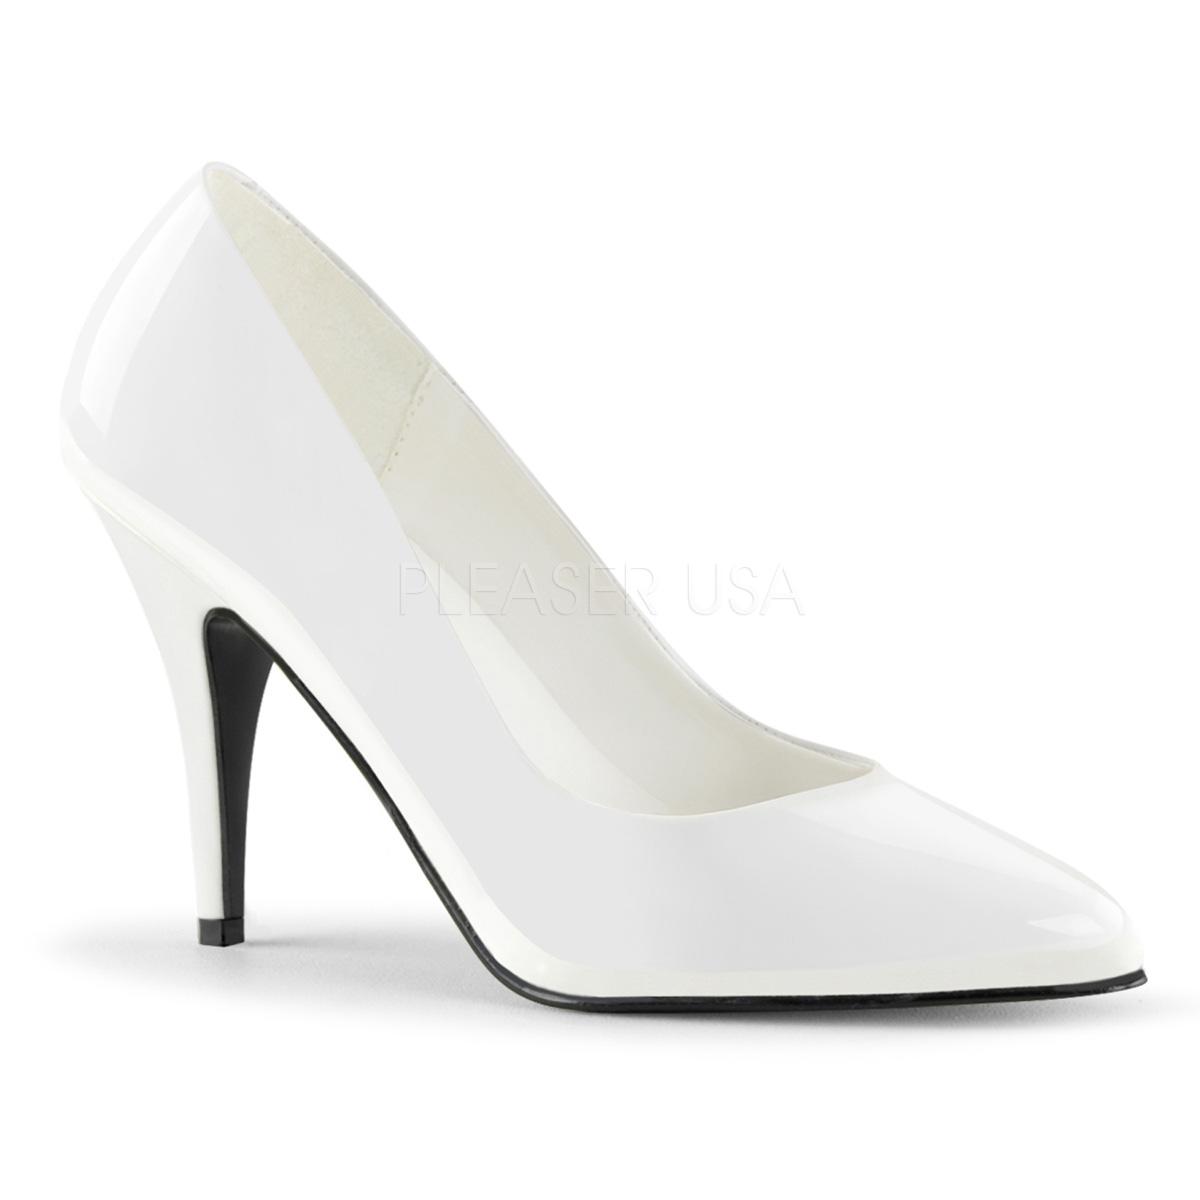 Large fitting White Patent Court Shoe